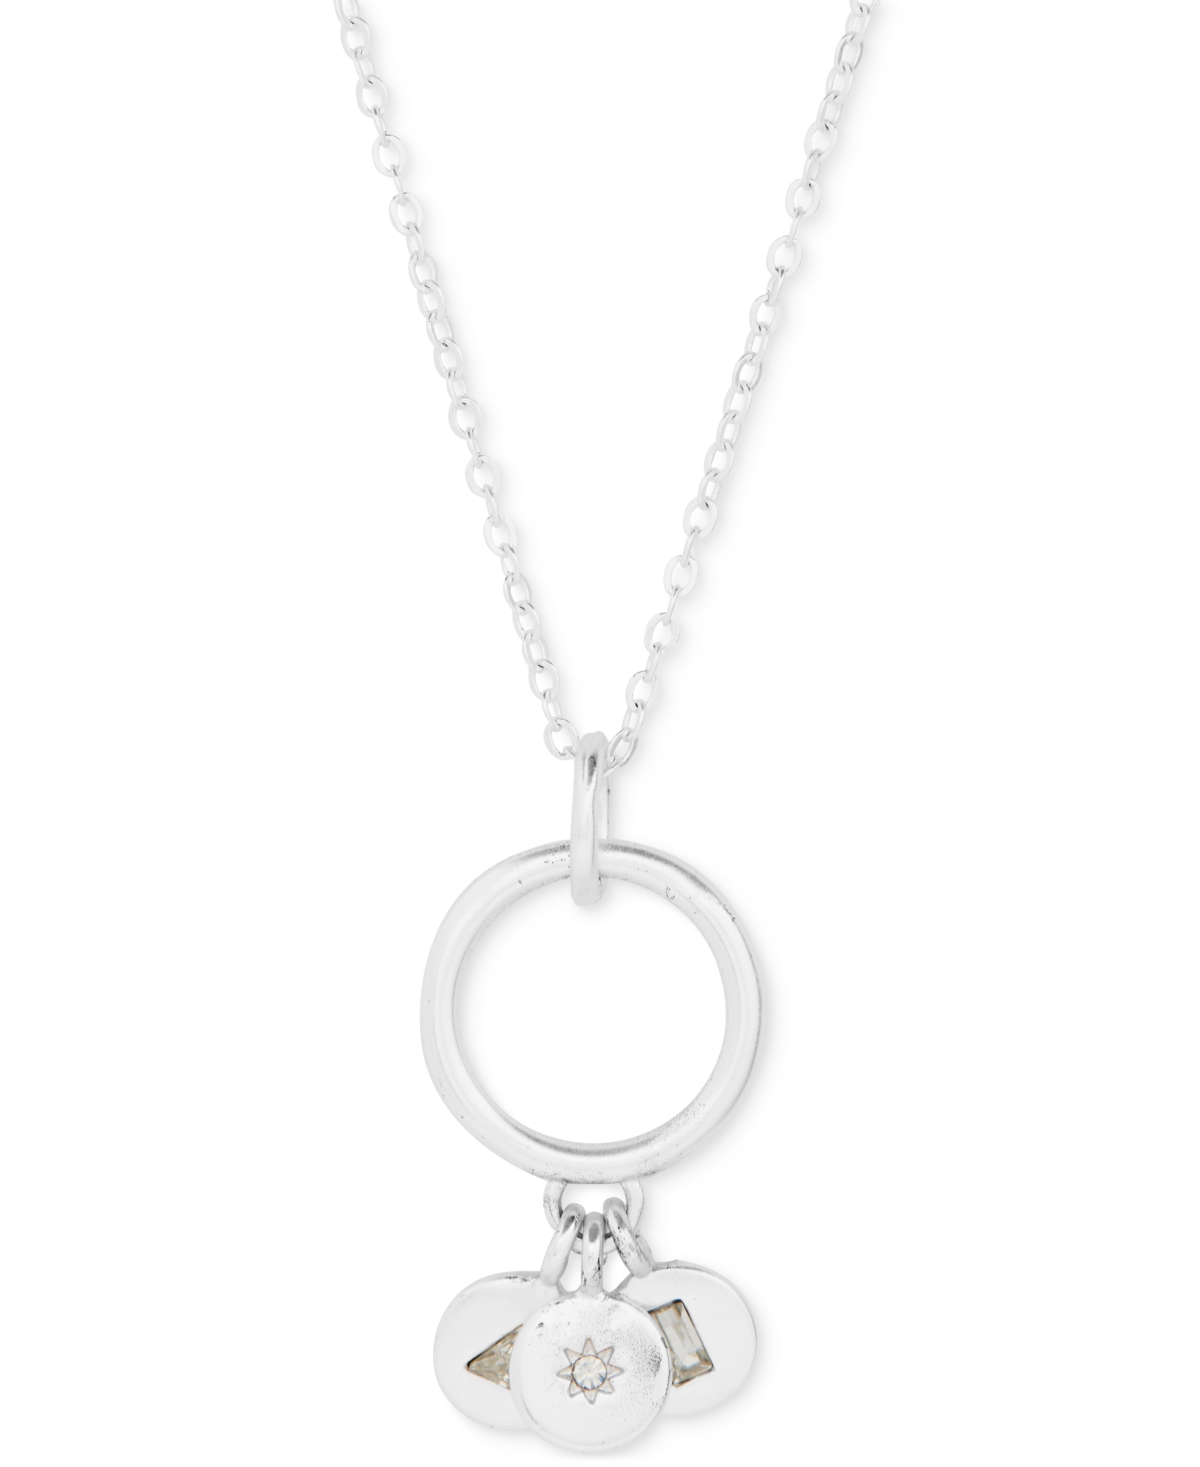 Lucky Brand Silver-tone Ring & Crystal Disc Multi-charm Pendant Necklace, 16" + 2" Extender